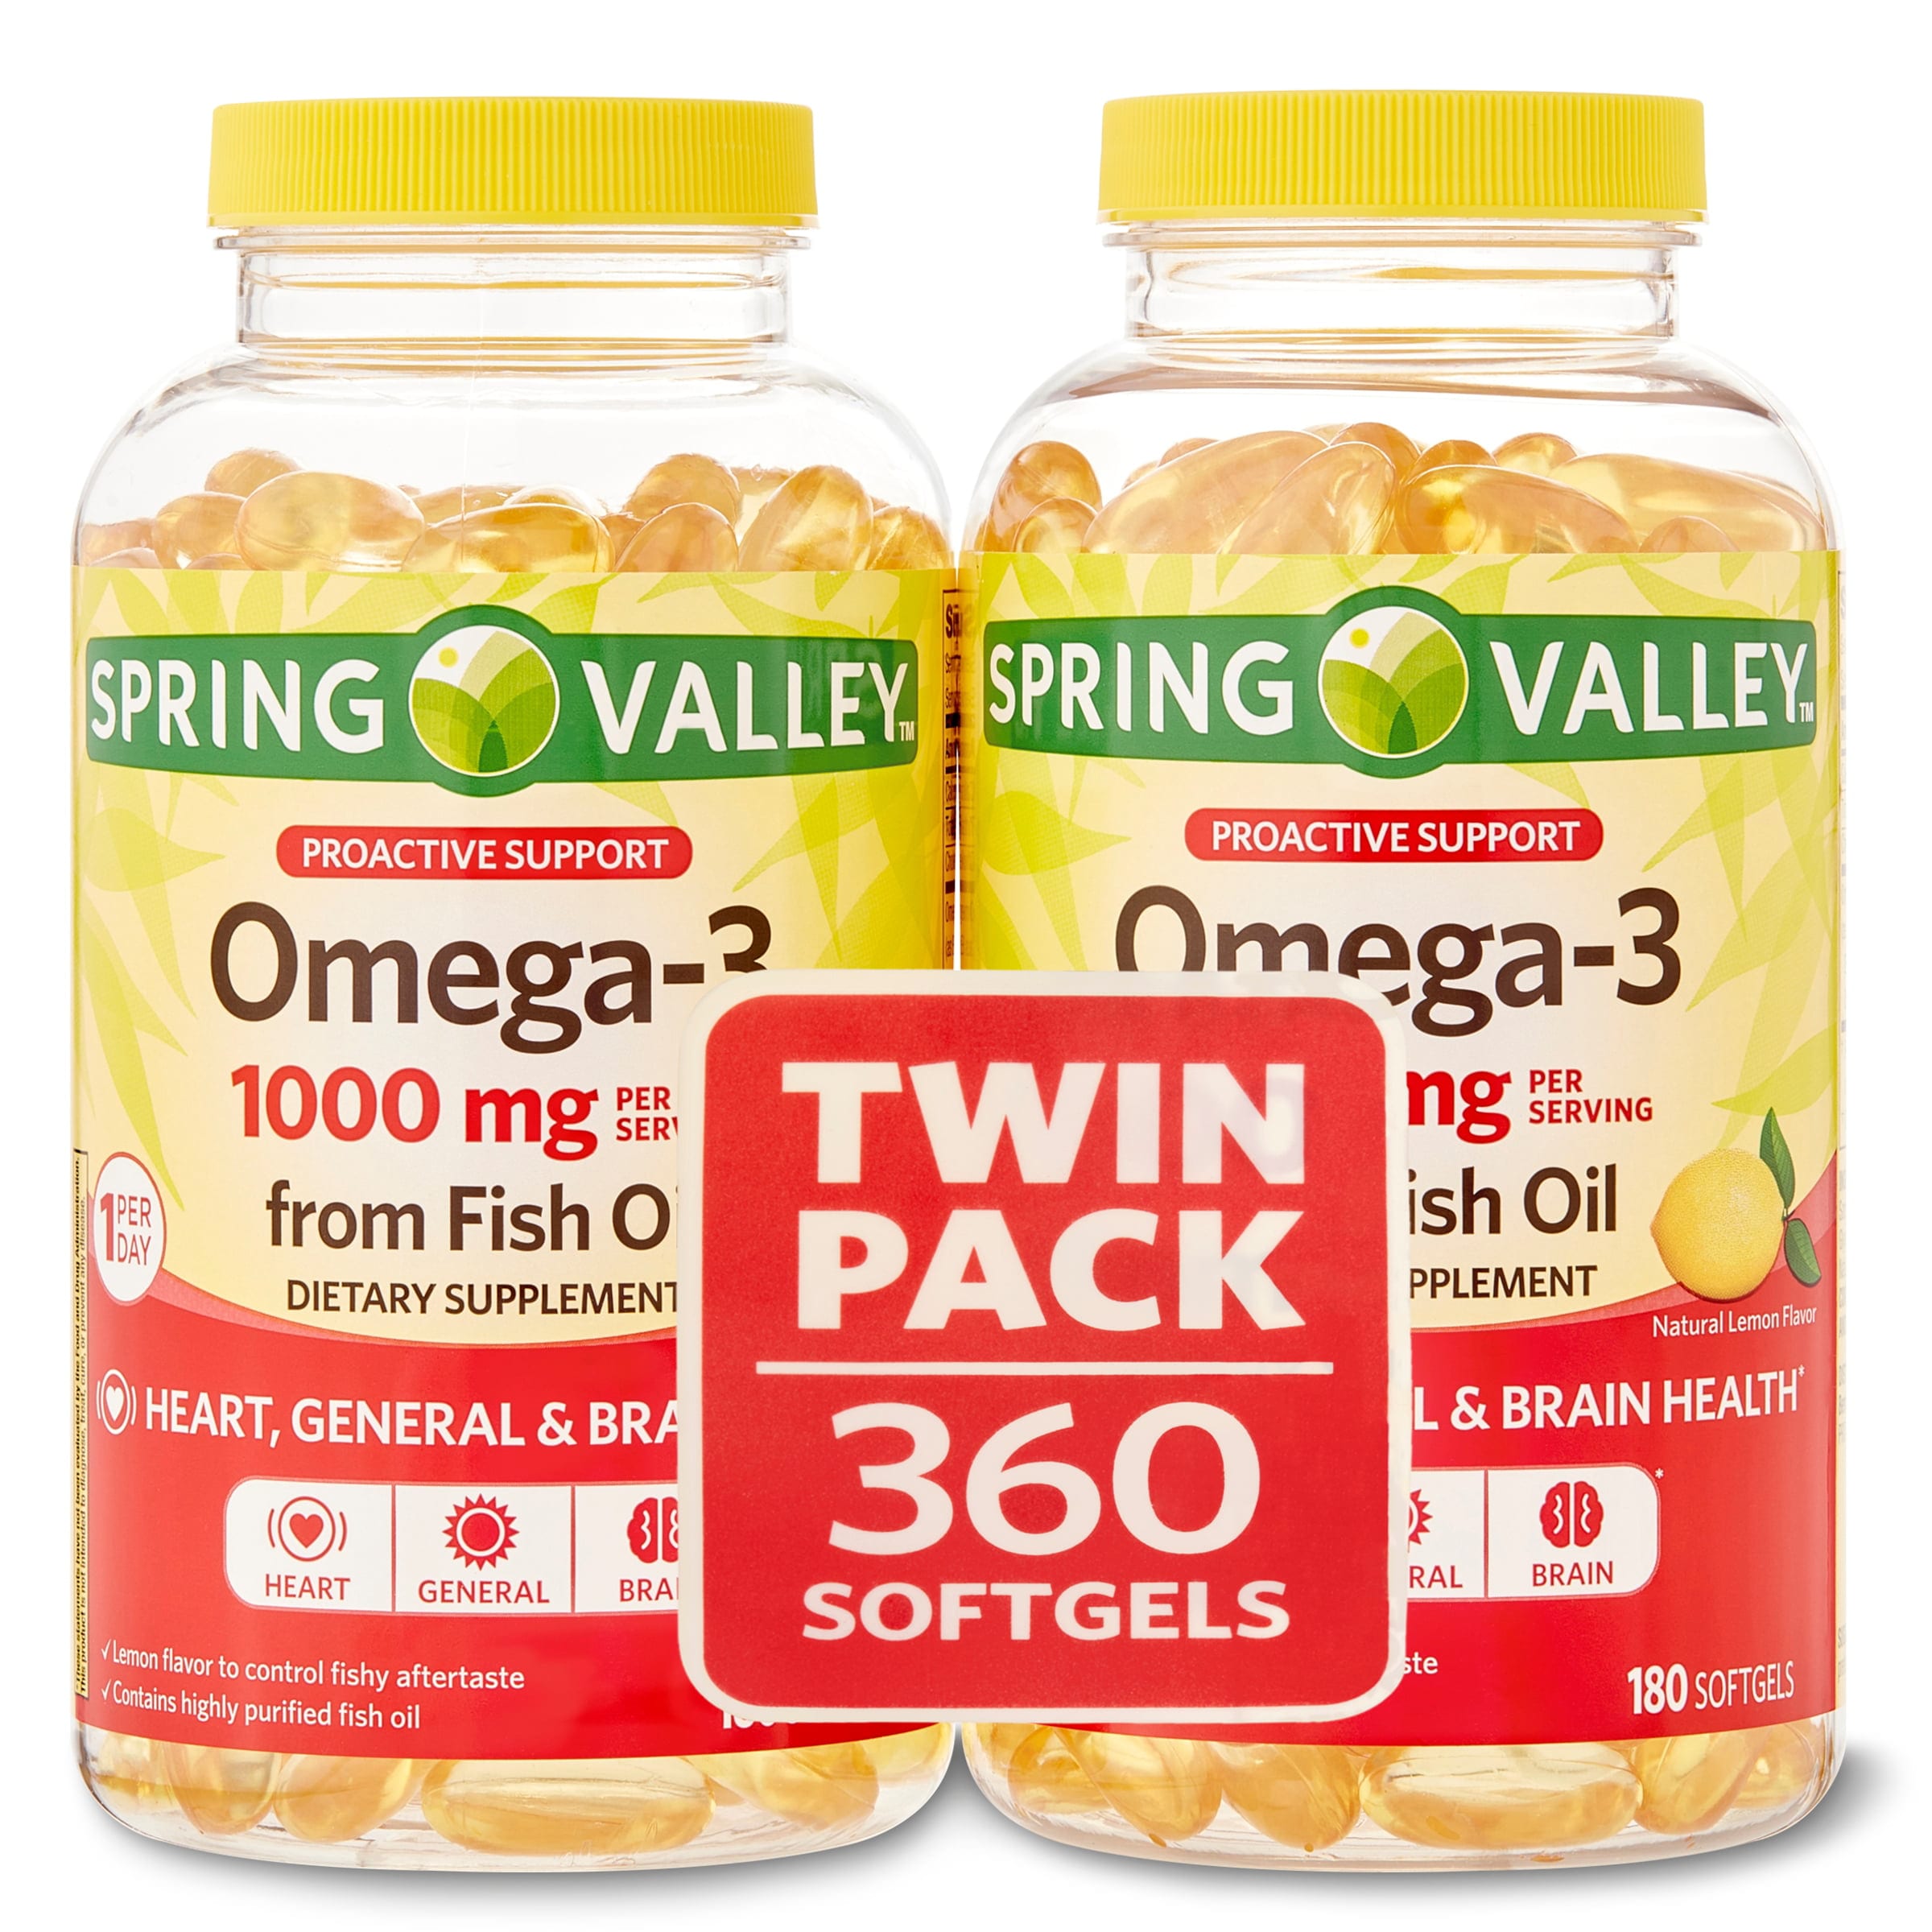 Spring Valley Omega-3 Natural Lemon Flavor Dietary Supplement Twin